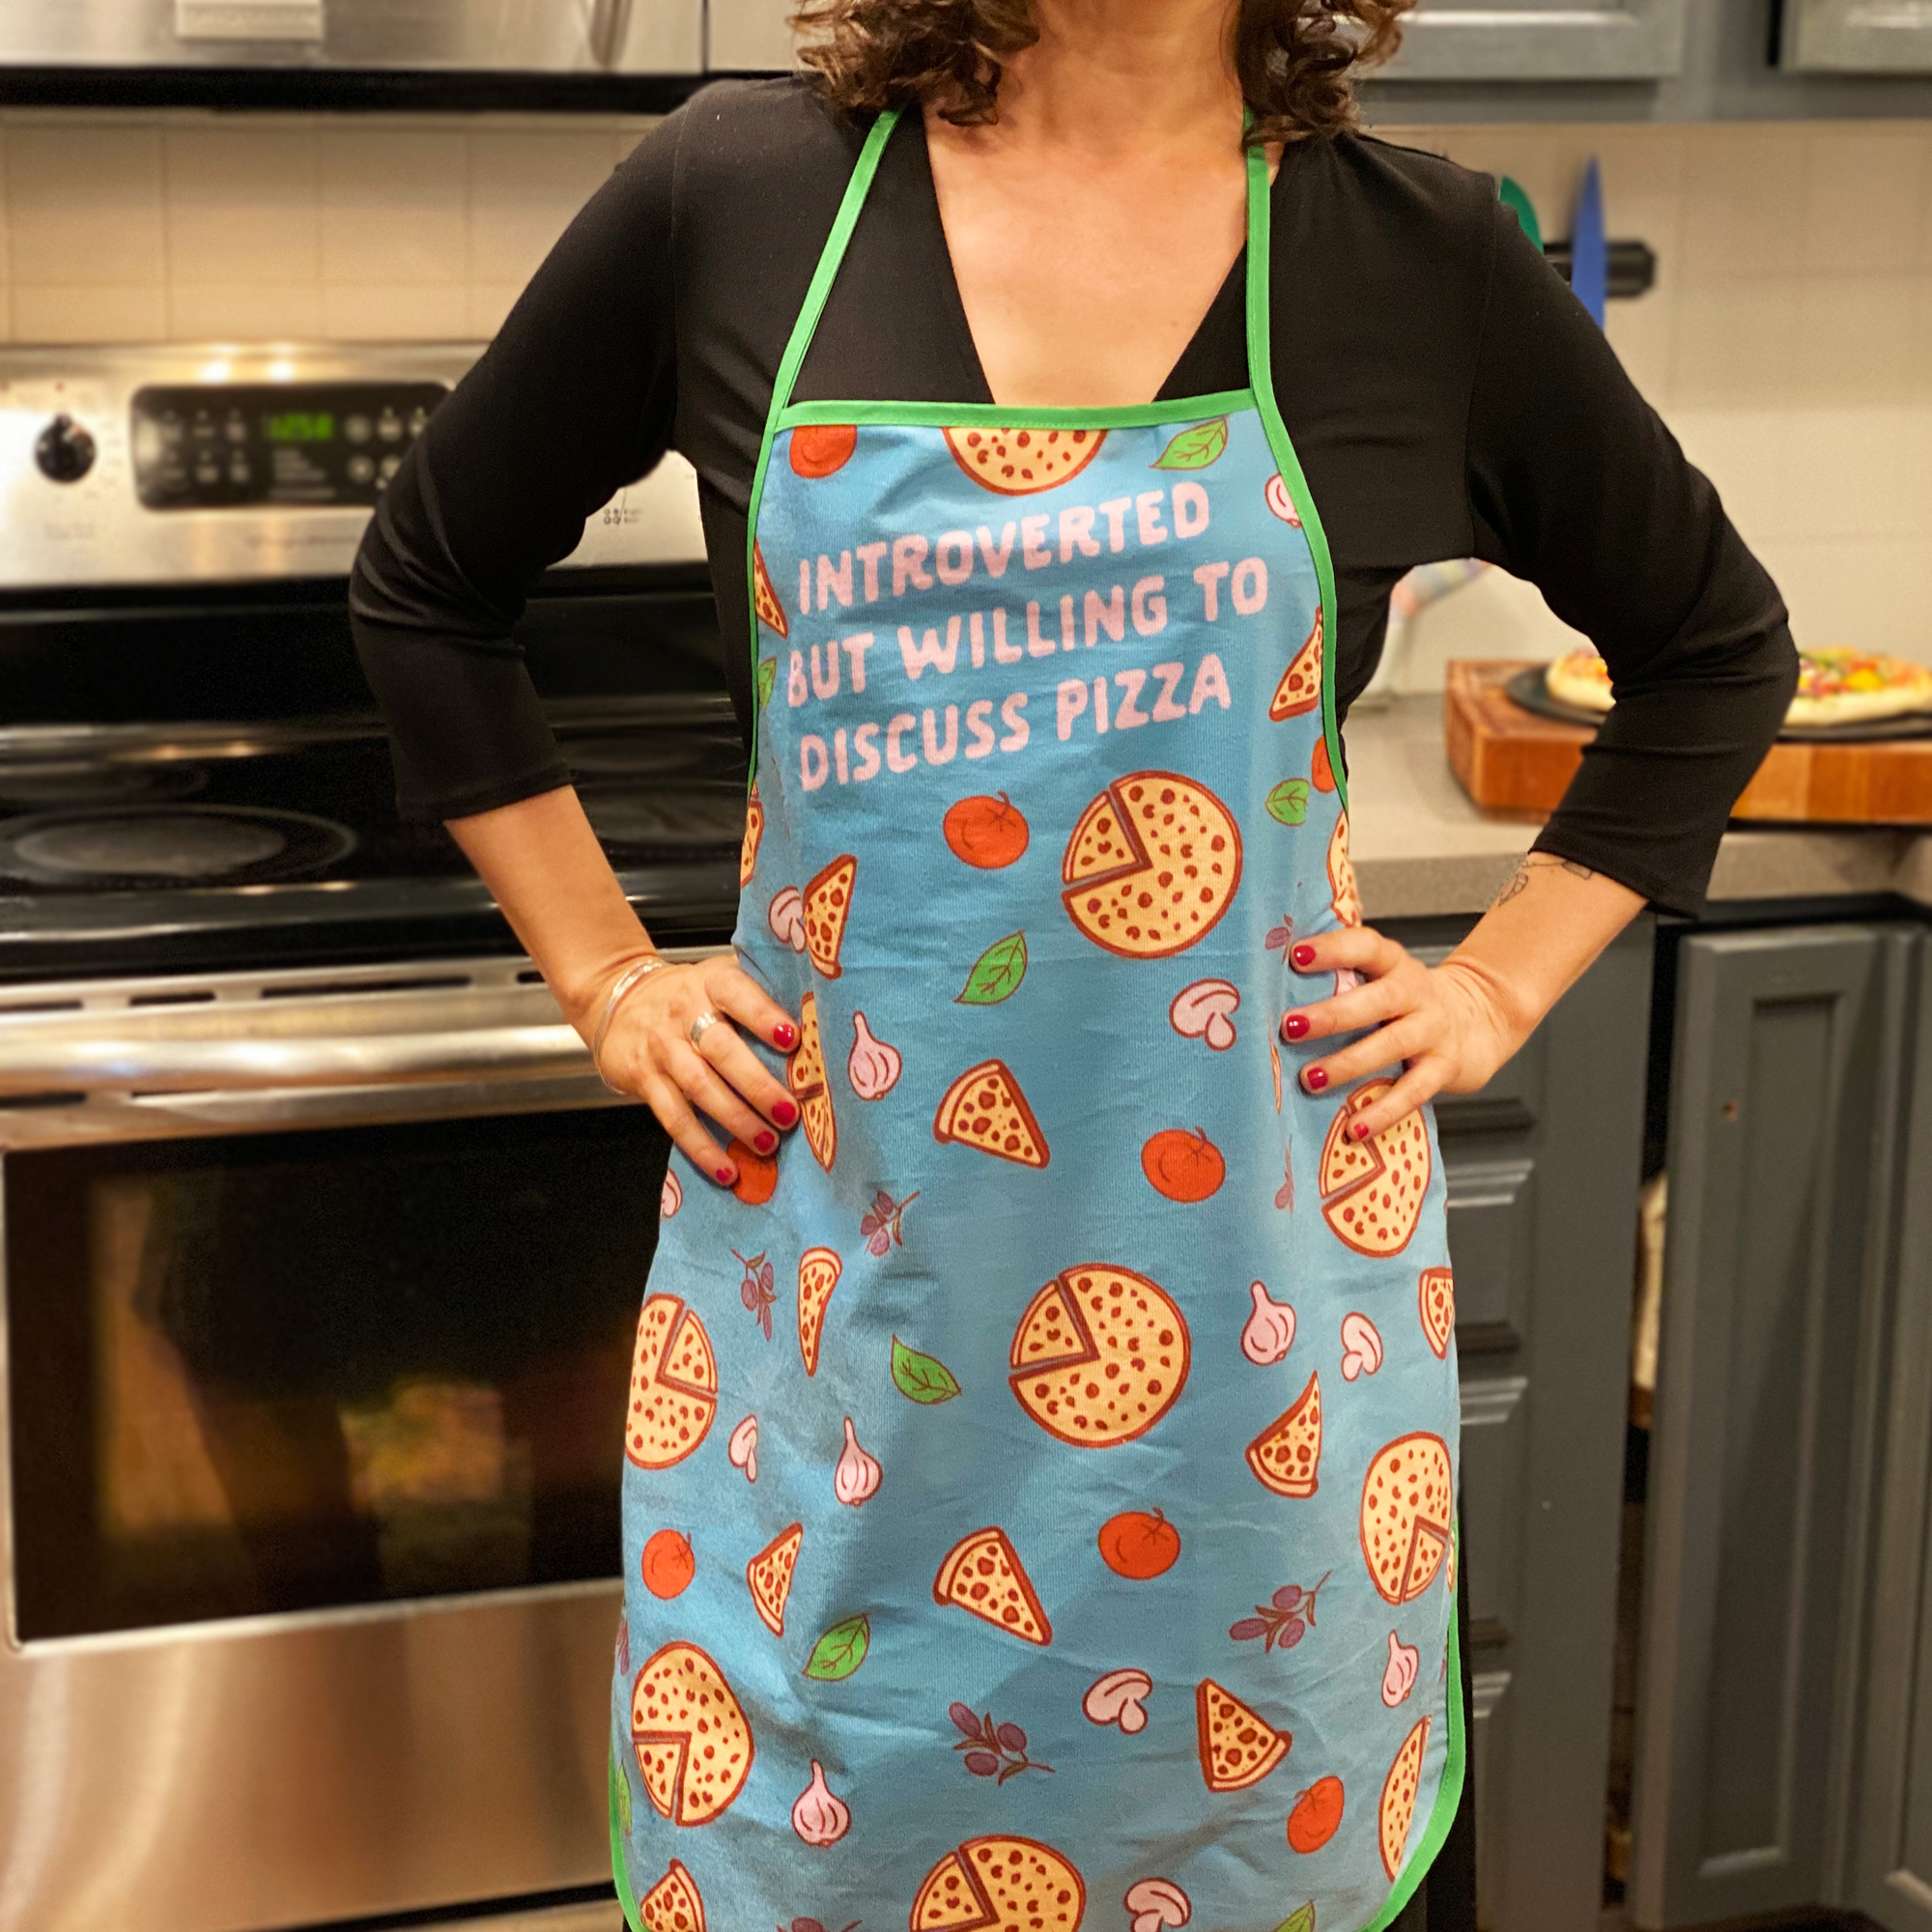 Introverted But Willing To Discuss Pizza Funny Baking Cooking Graphic Kitchen Accessories - image 2 of 8